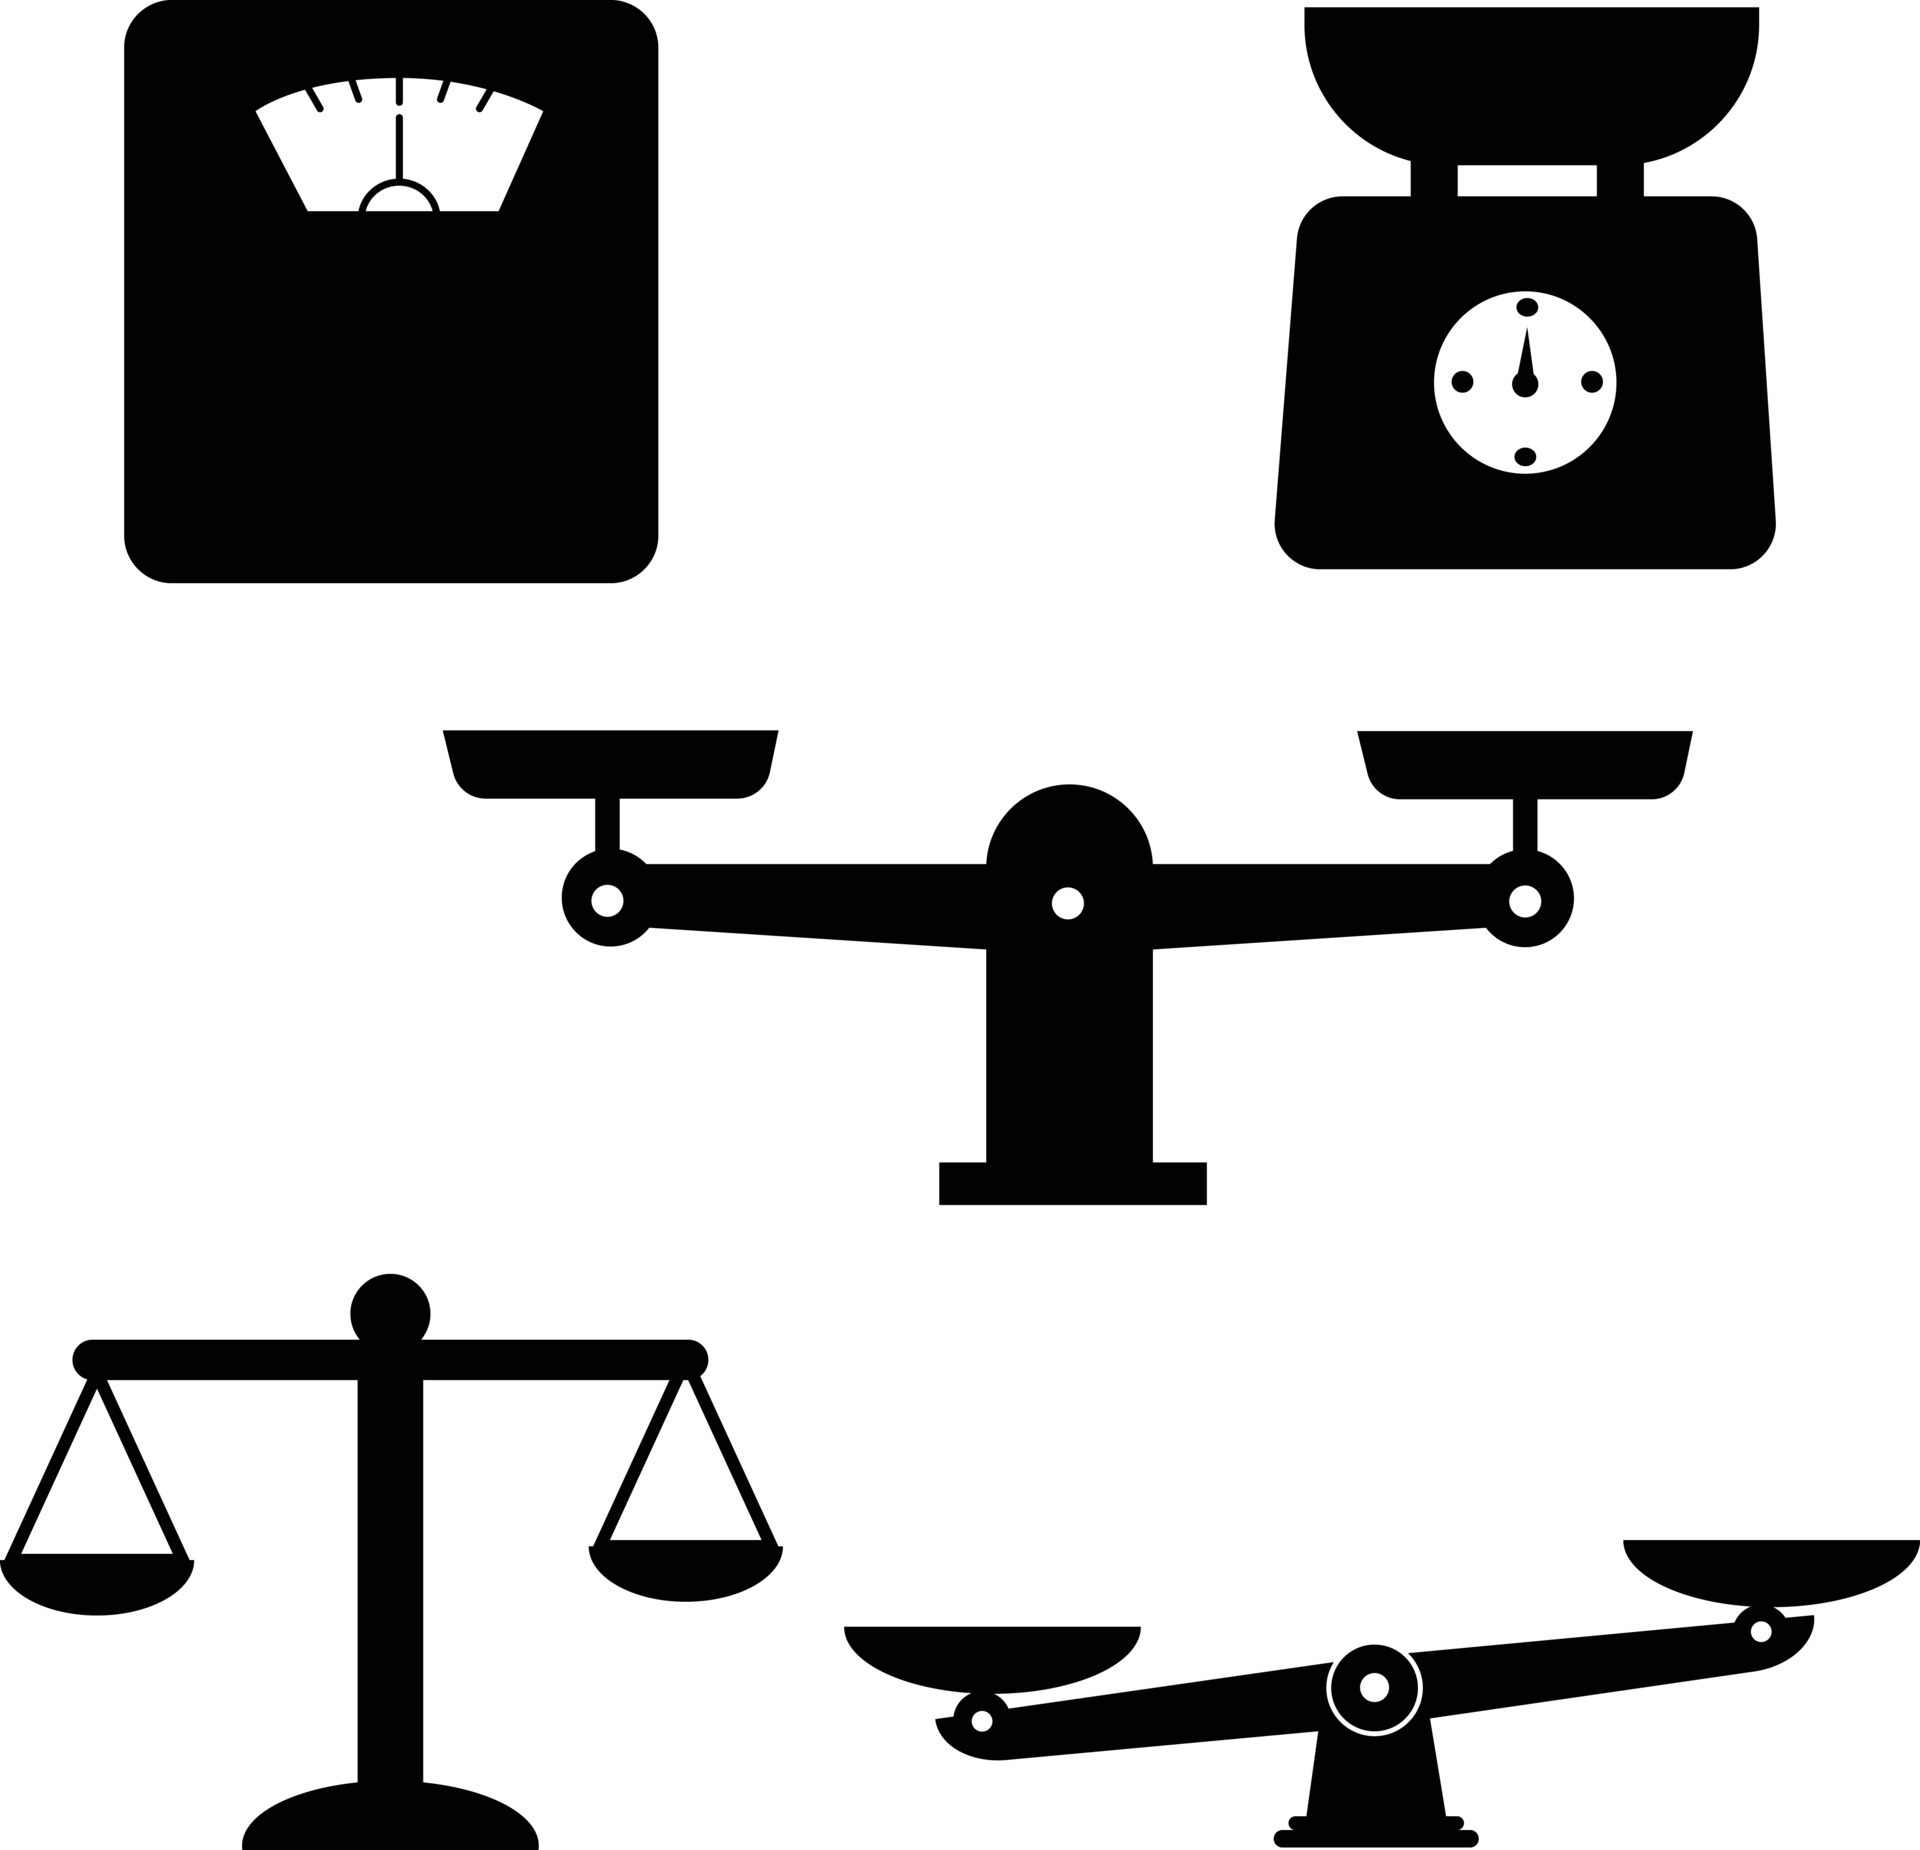 https://static.vecteezy.com/system/resources/previews/009/795/973/original/scale-and-weight-icons-set-scales-of-justice-icon-white-background-weighing-machine-symbol-law-scale-sign-compare-logo-symbol-vector.jpg